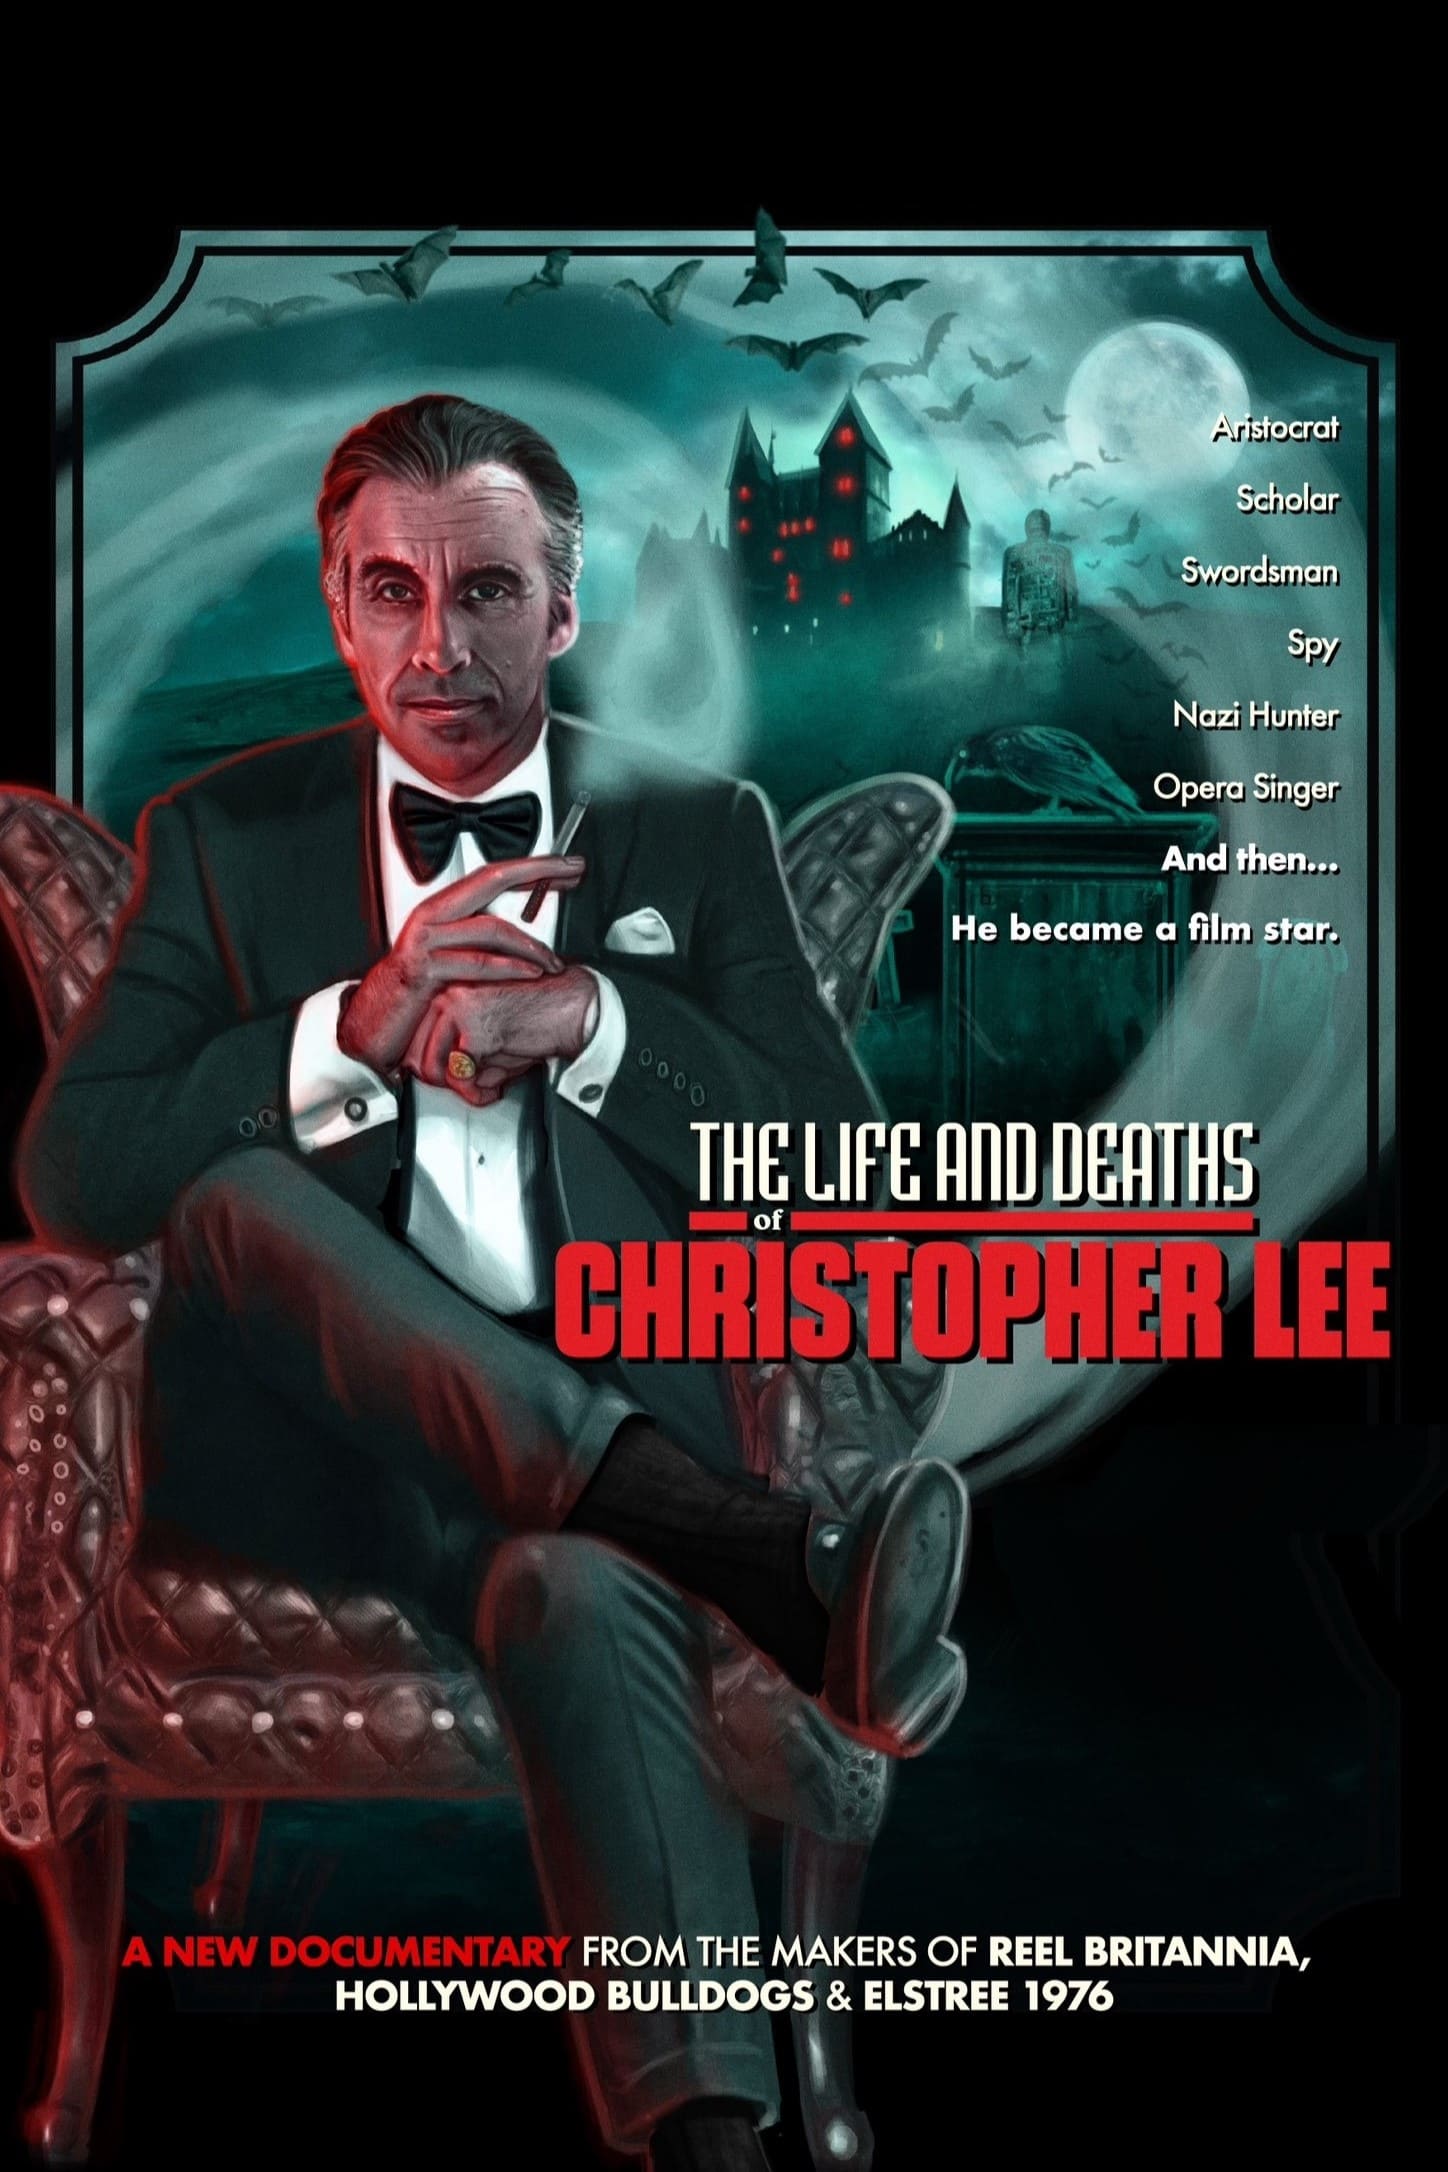 The Life and Deaths of Christopher Lee